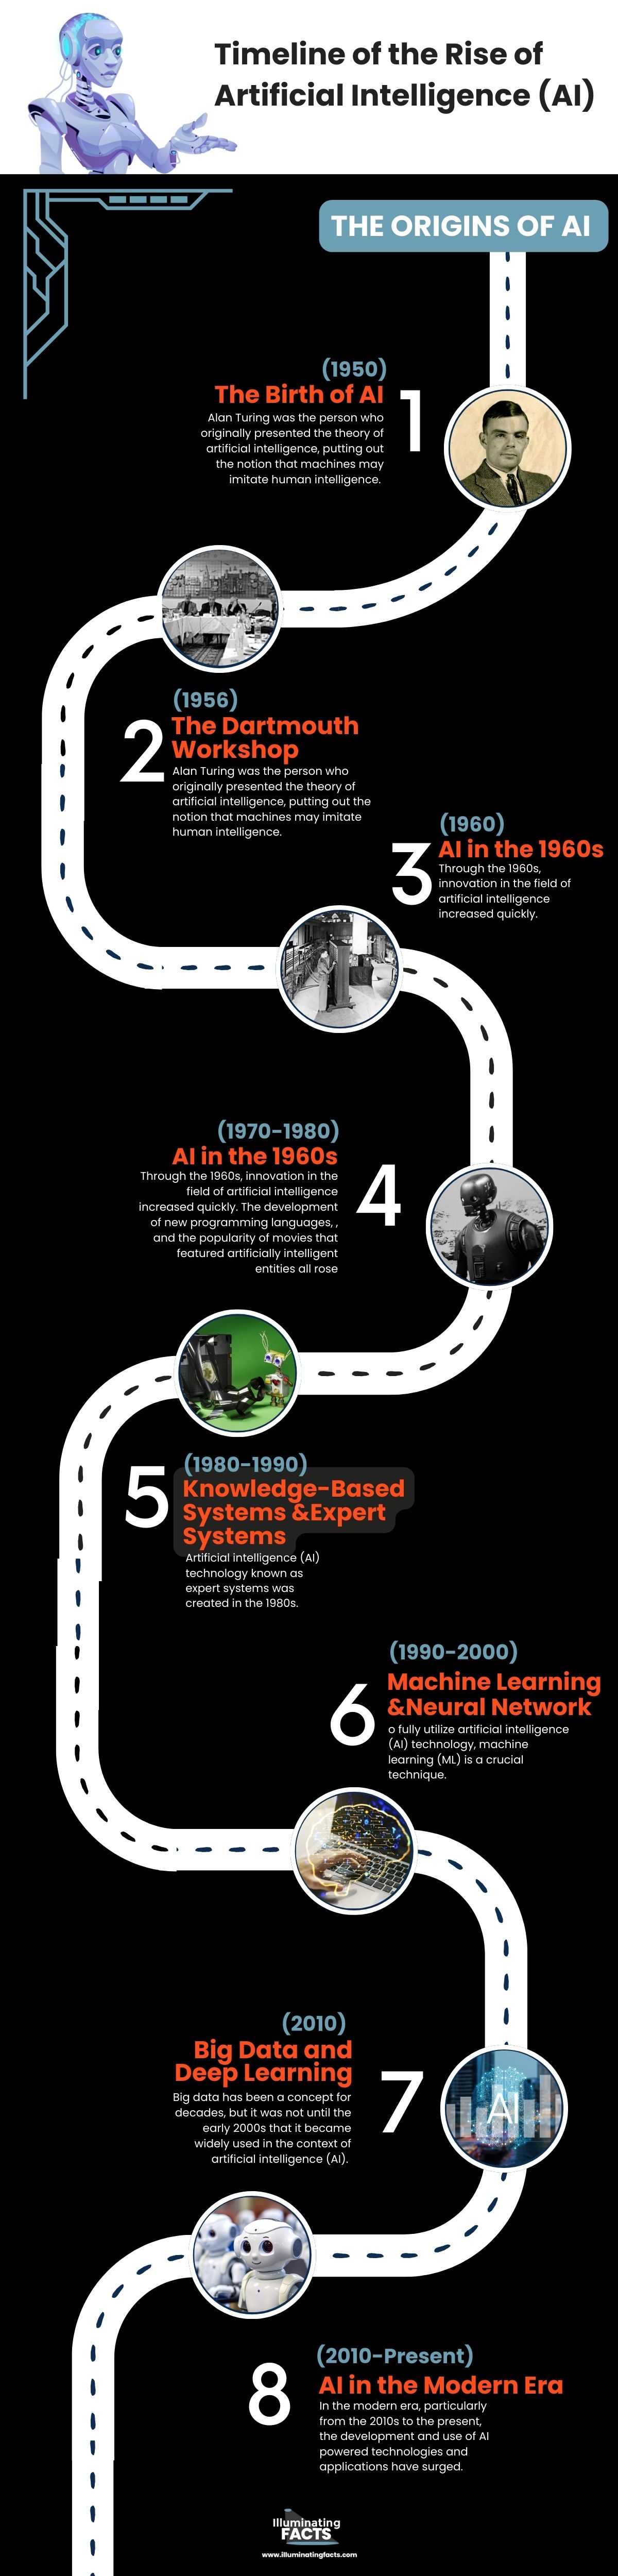 Timeline of the Rise of Artificial Intelligence (AI)